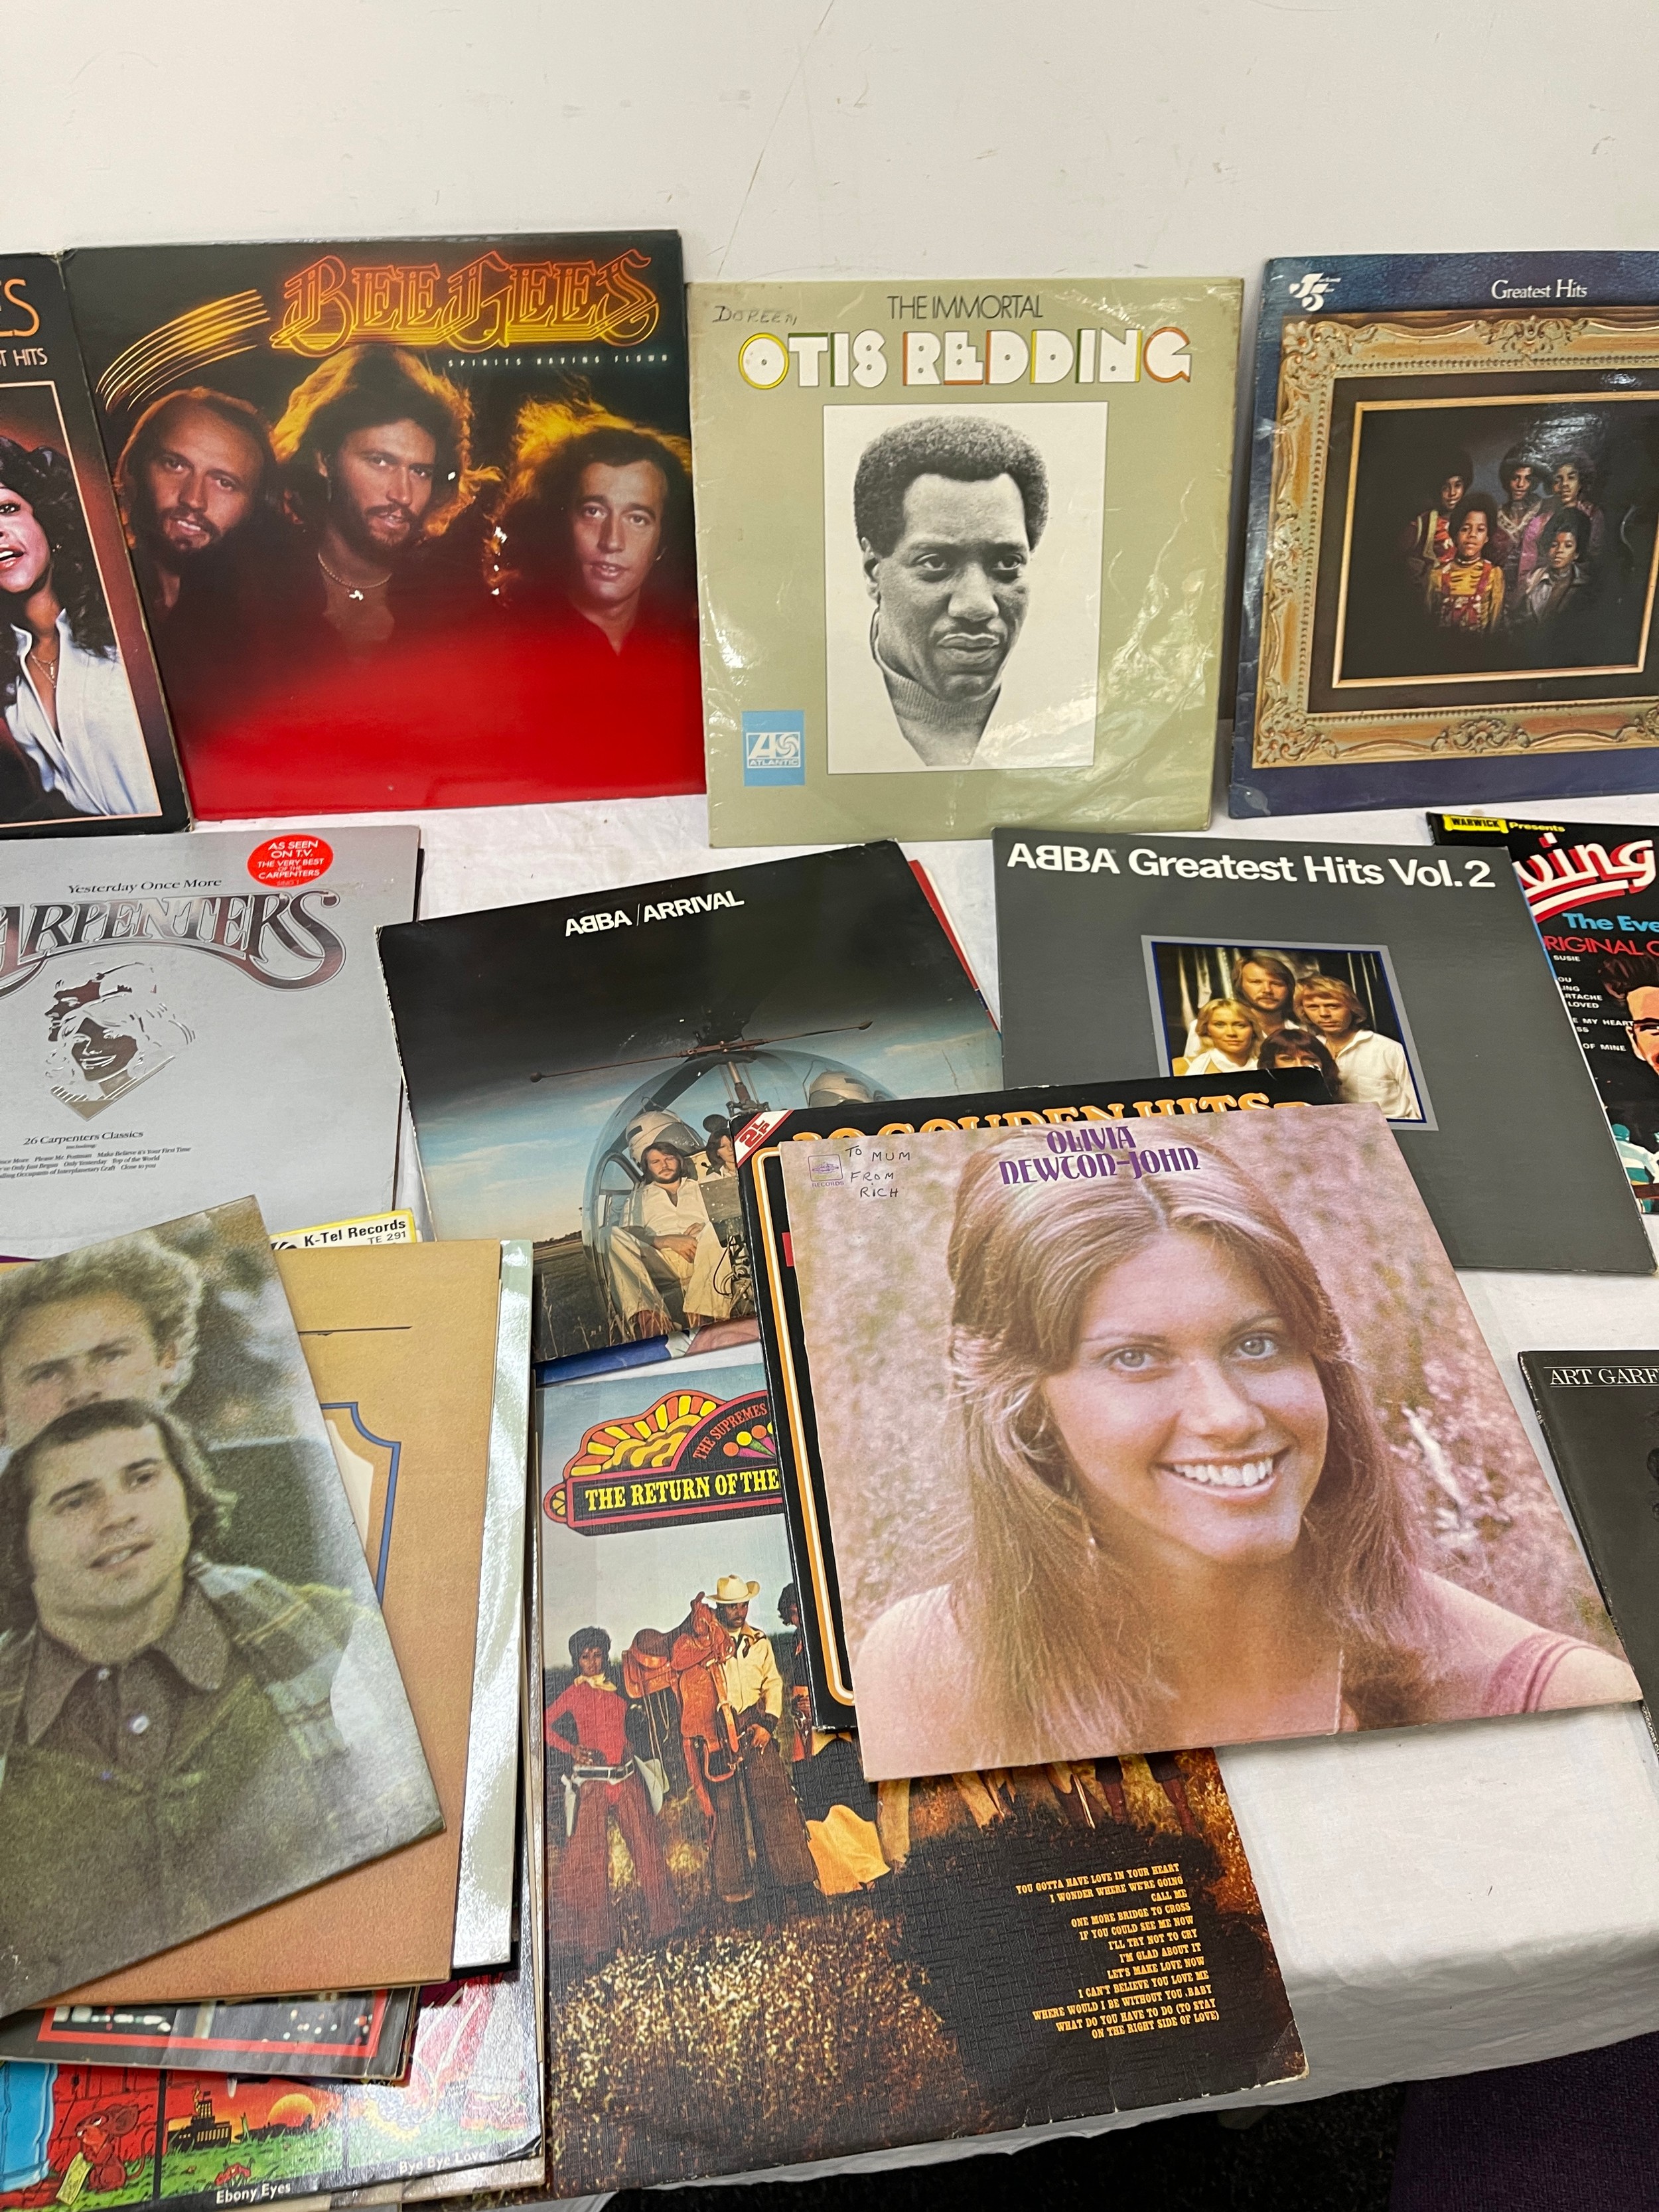 Selection of records includes Bee gees, otis rodding, living legends, abba etc - Image 3 of 4